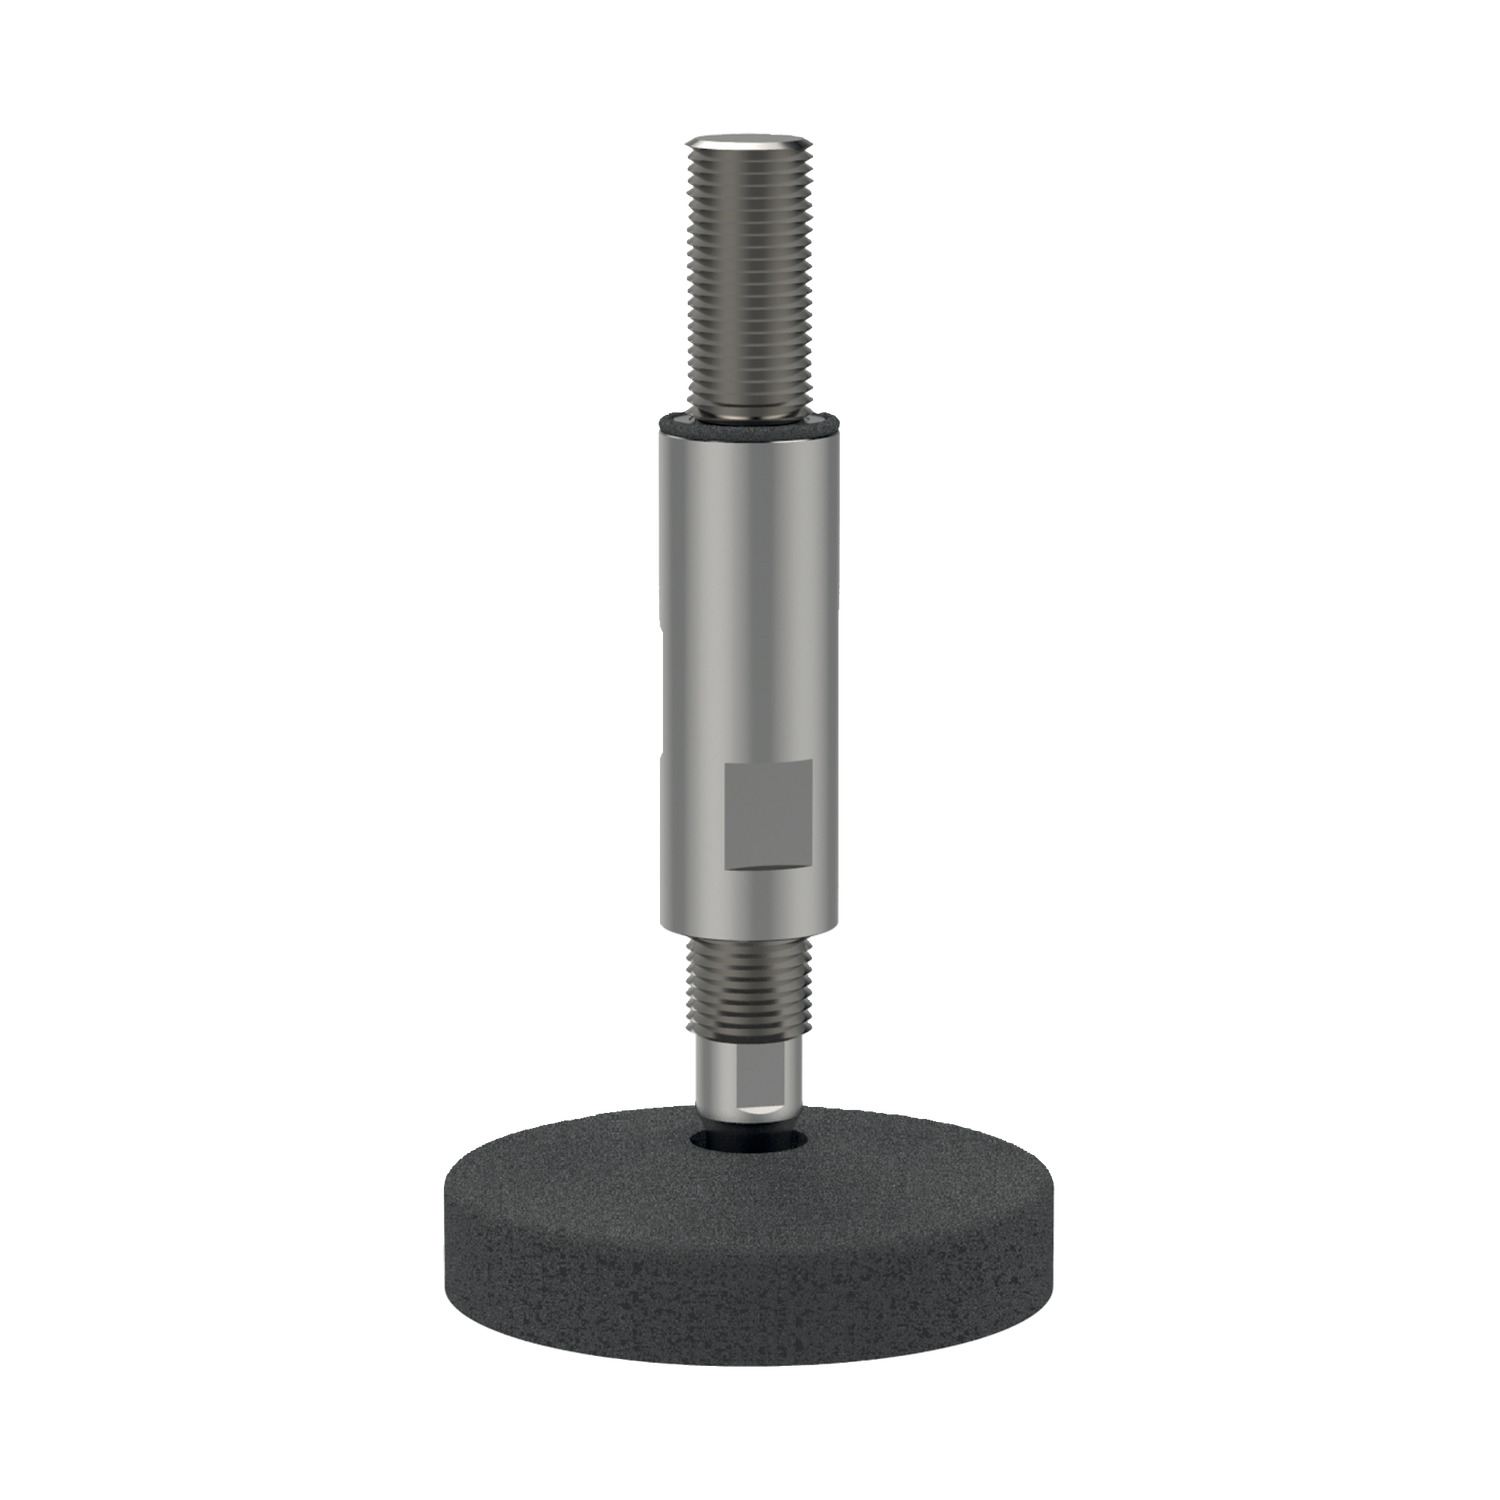 Product 34771, Hygienic Levelling Feet stainless steel, with plastic base / 